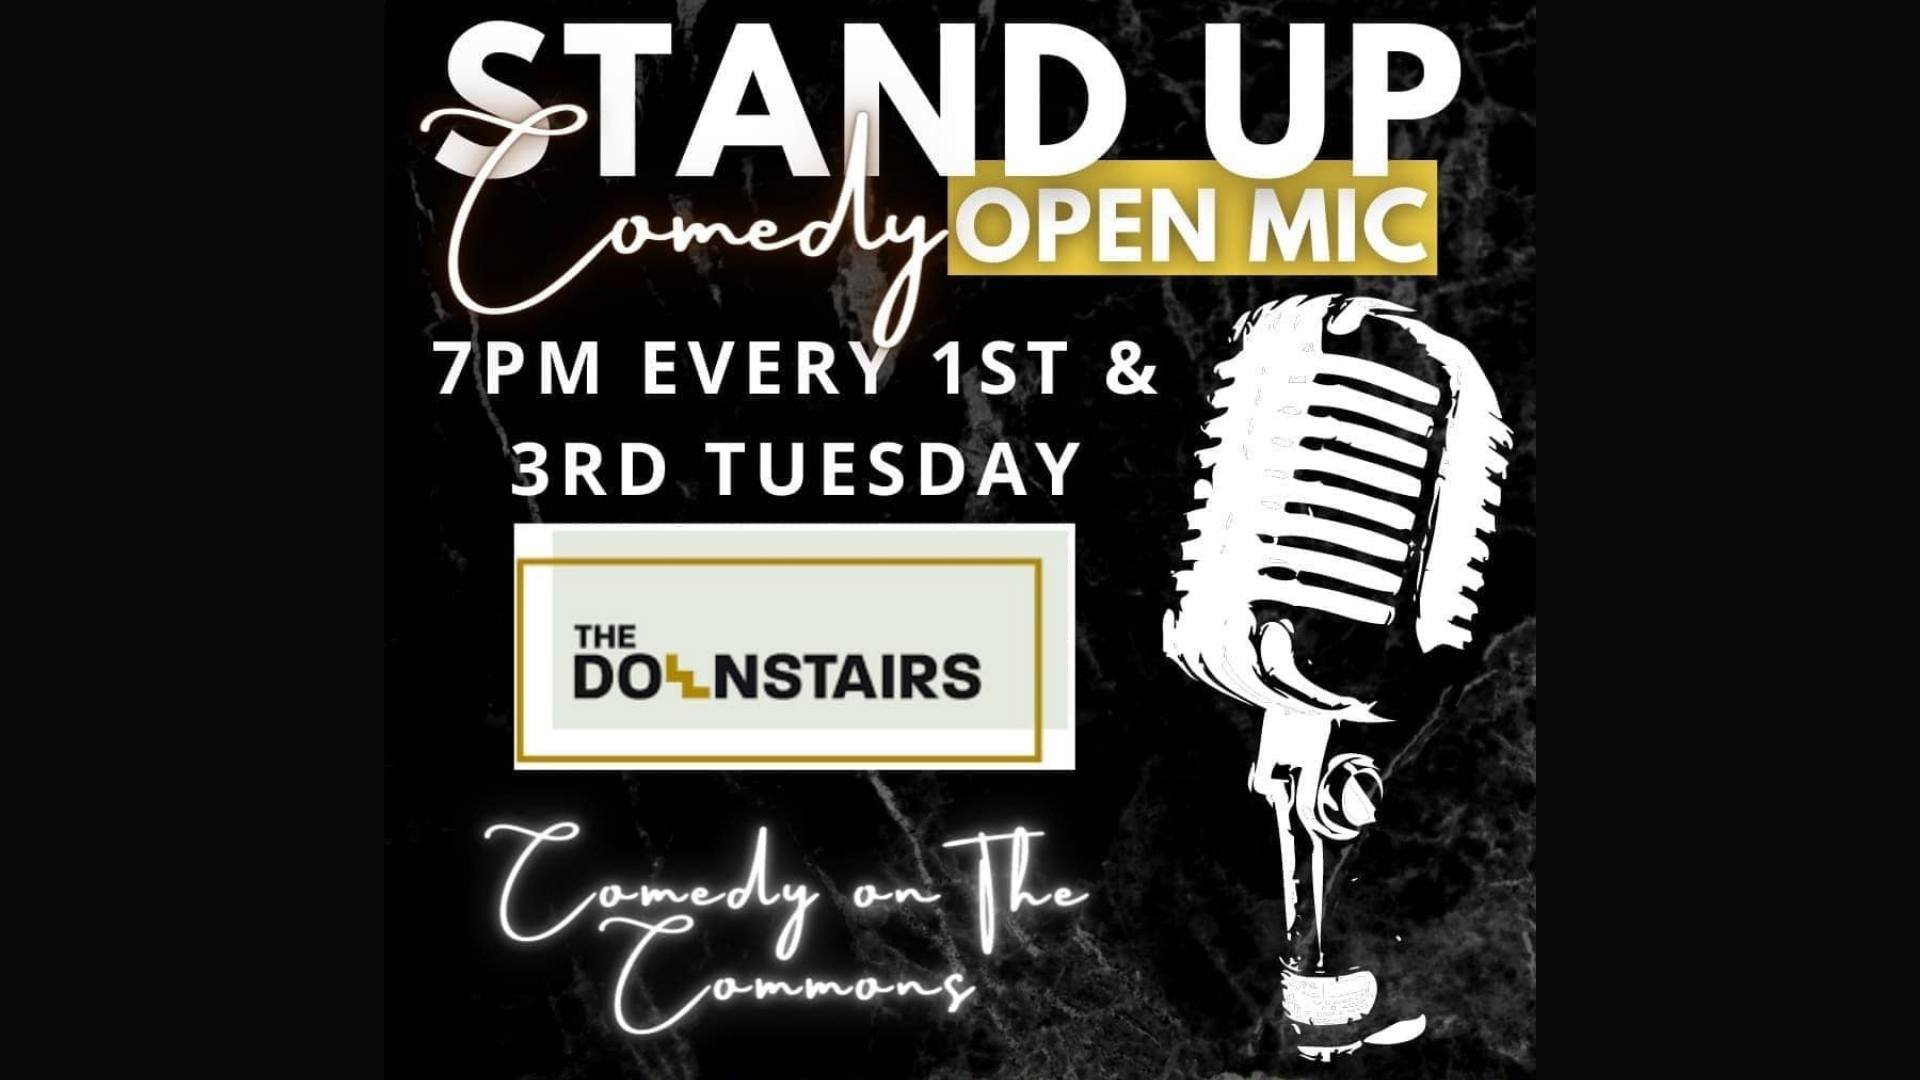 Stand Up Comedy Open Mic hosted by Comedy On The Commons